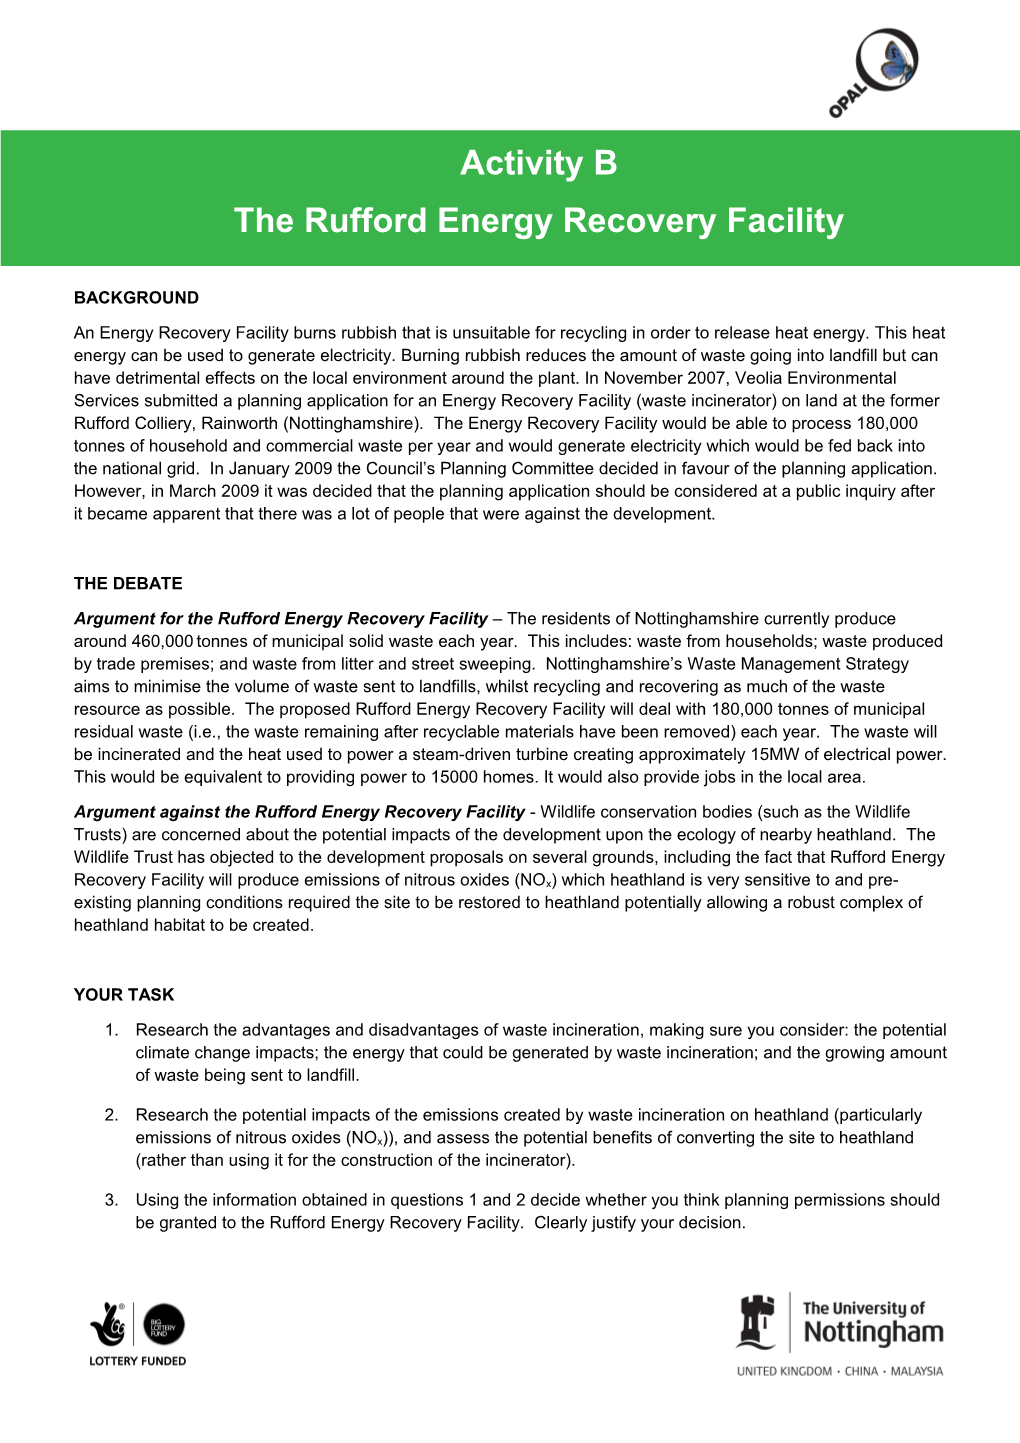 Argument for the Rufford Energy Recovery Facility the Residents of Nottinghamshire Currently